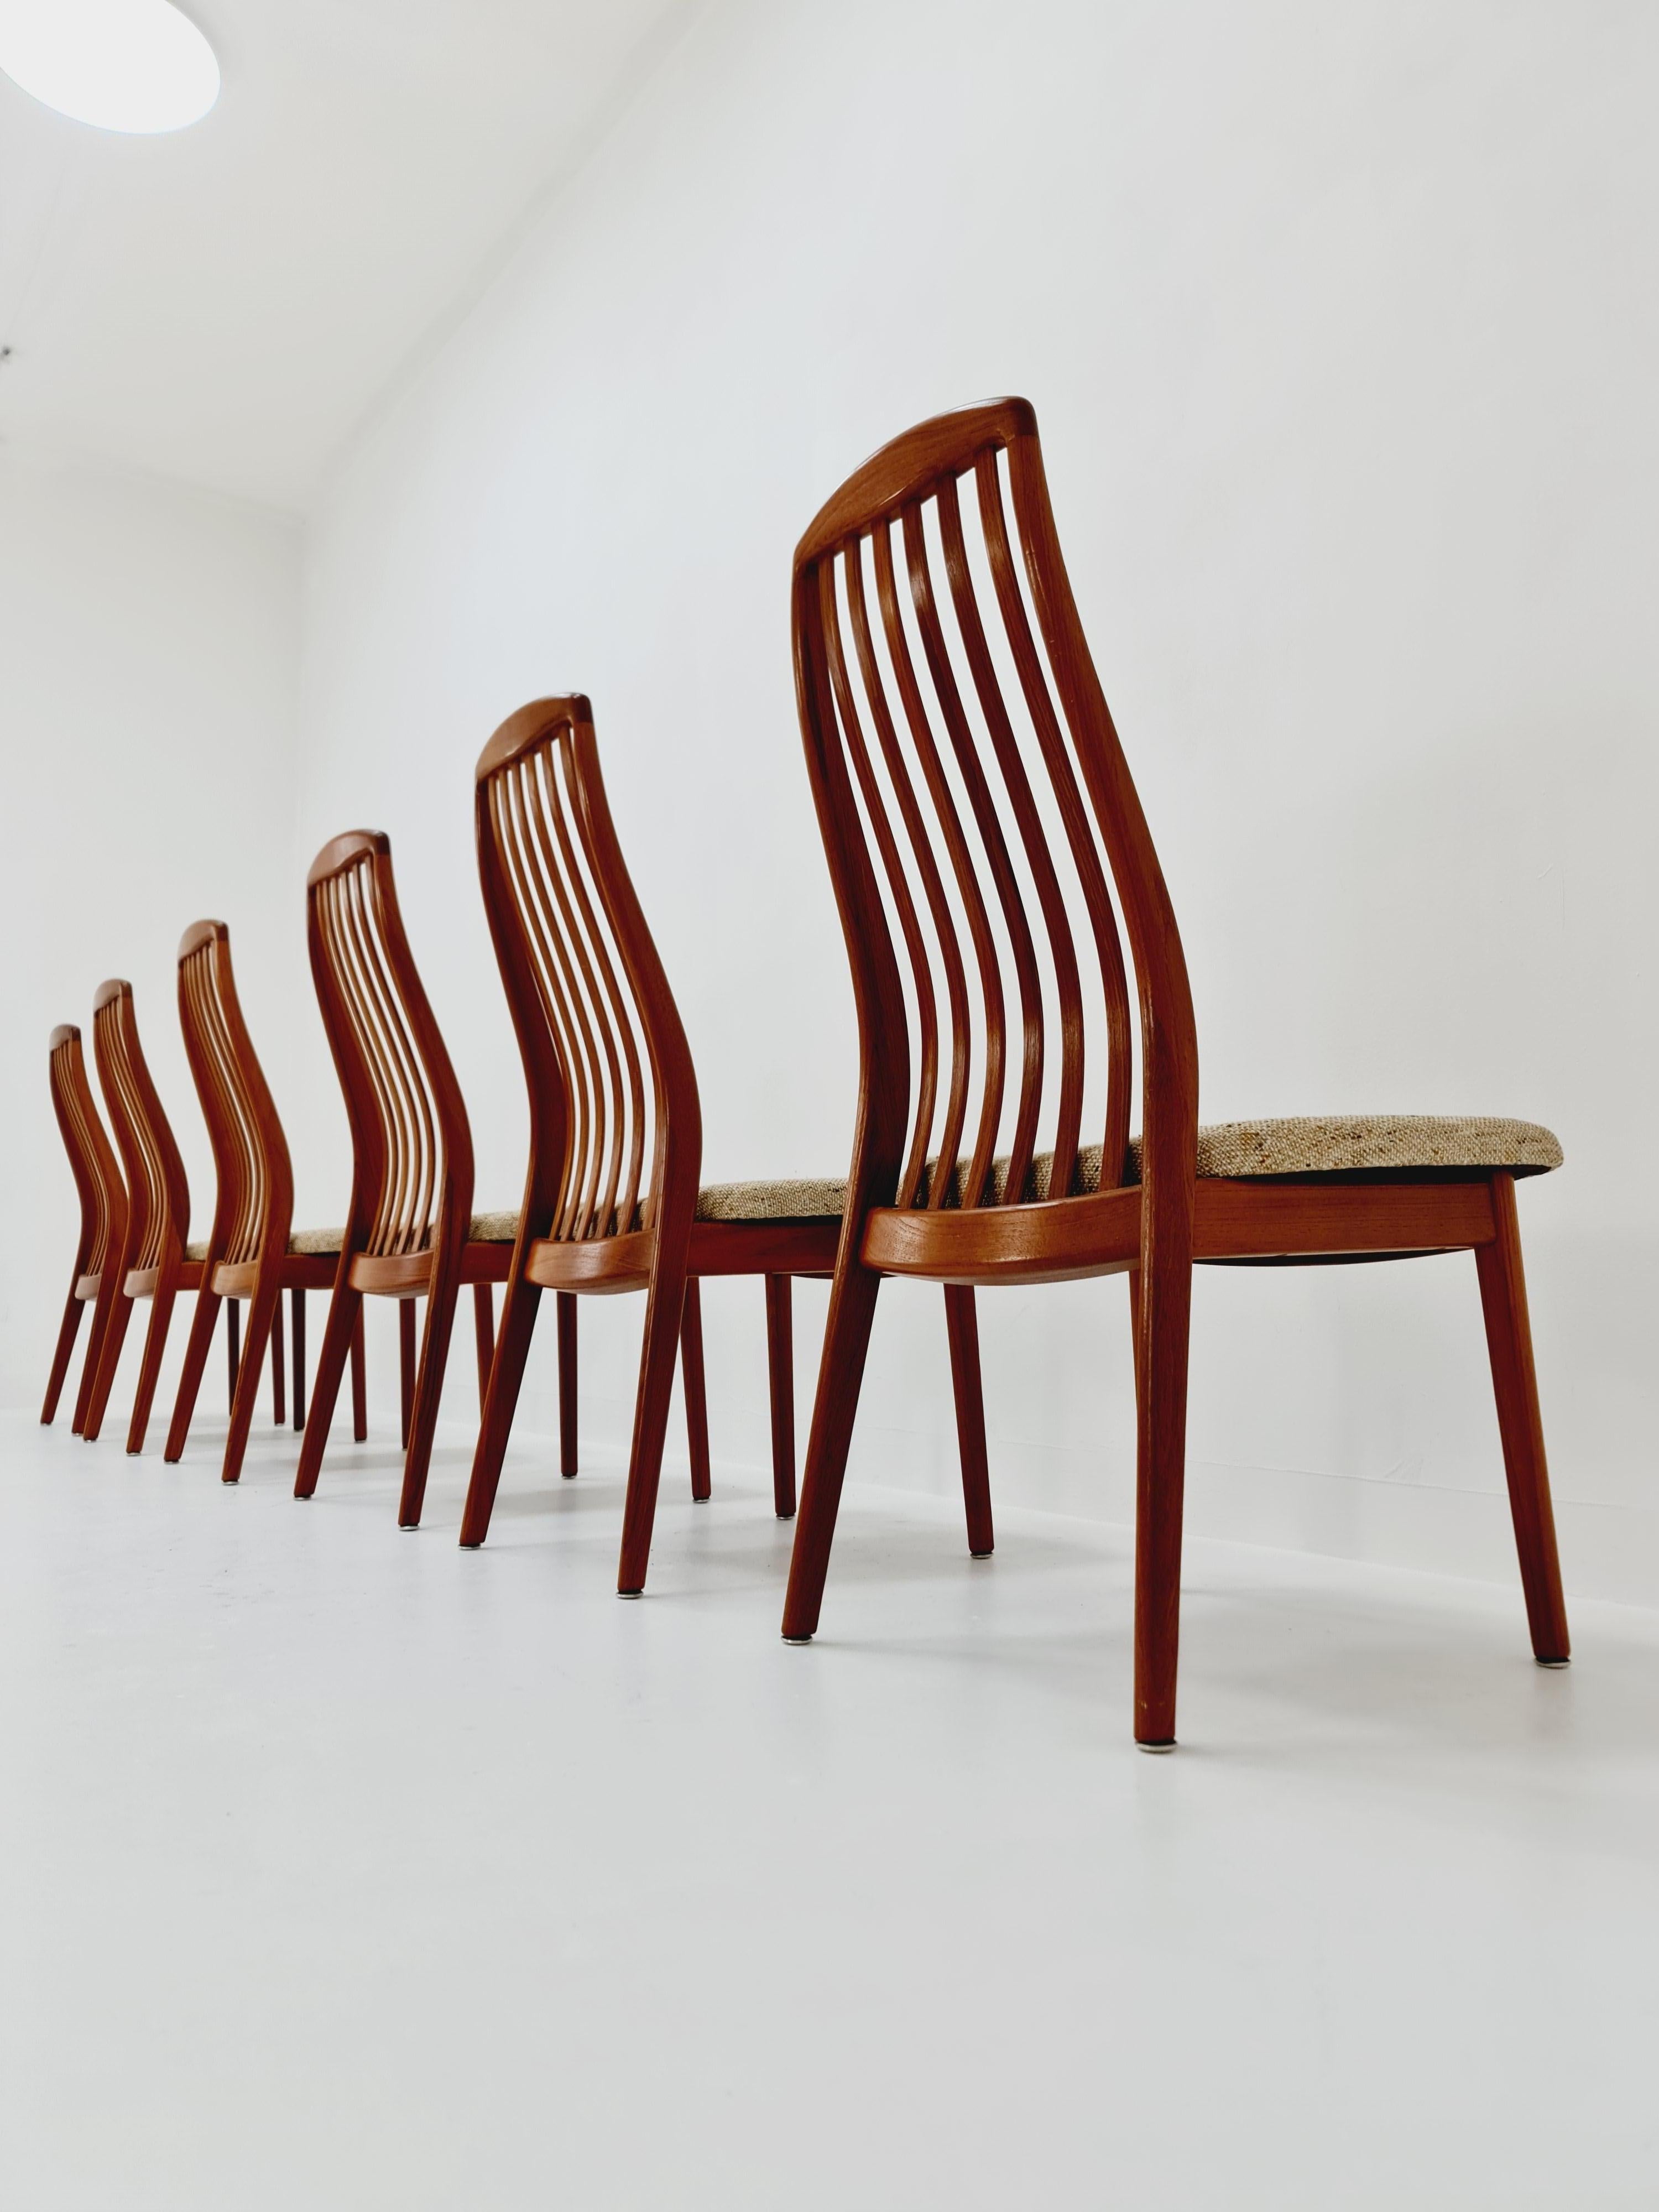 Mid-20th Century Danish teak dining chairs by Schou Andersen 1960s, set of 6 For Sale